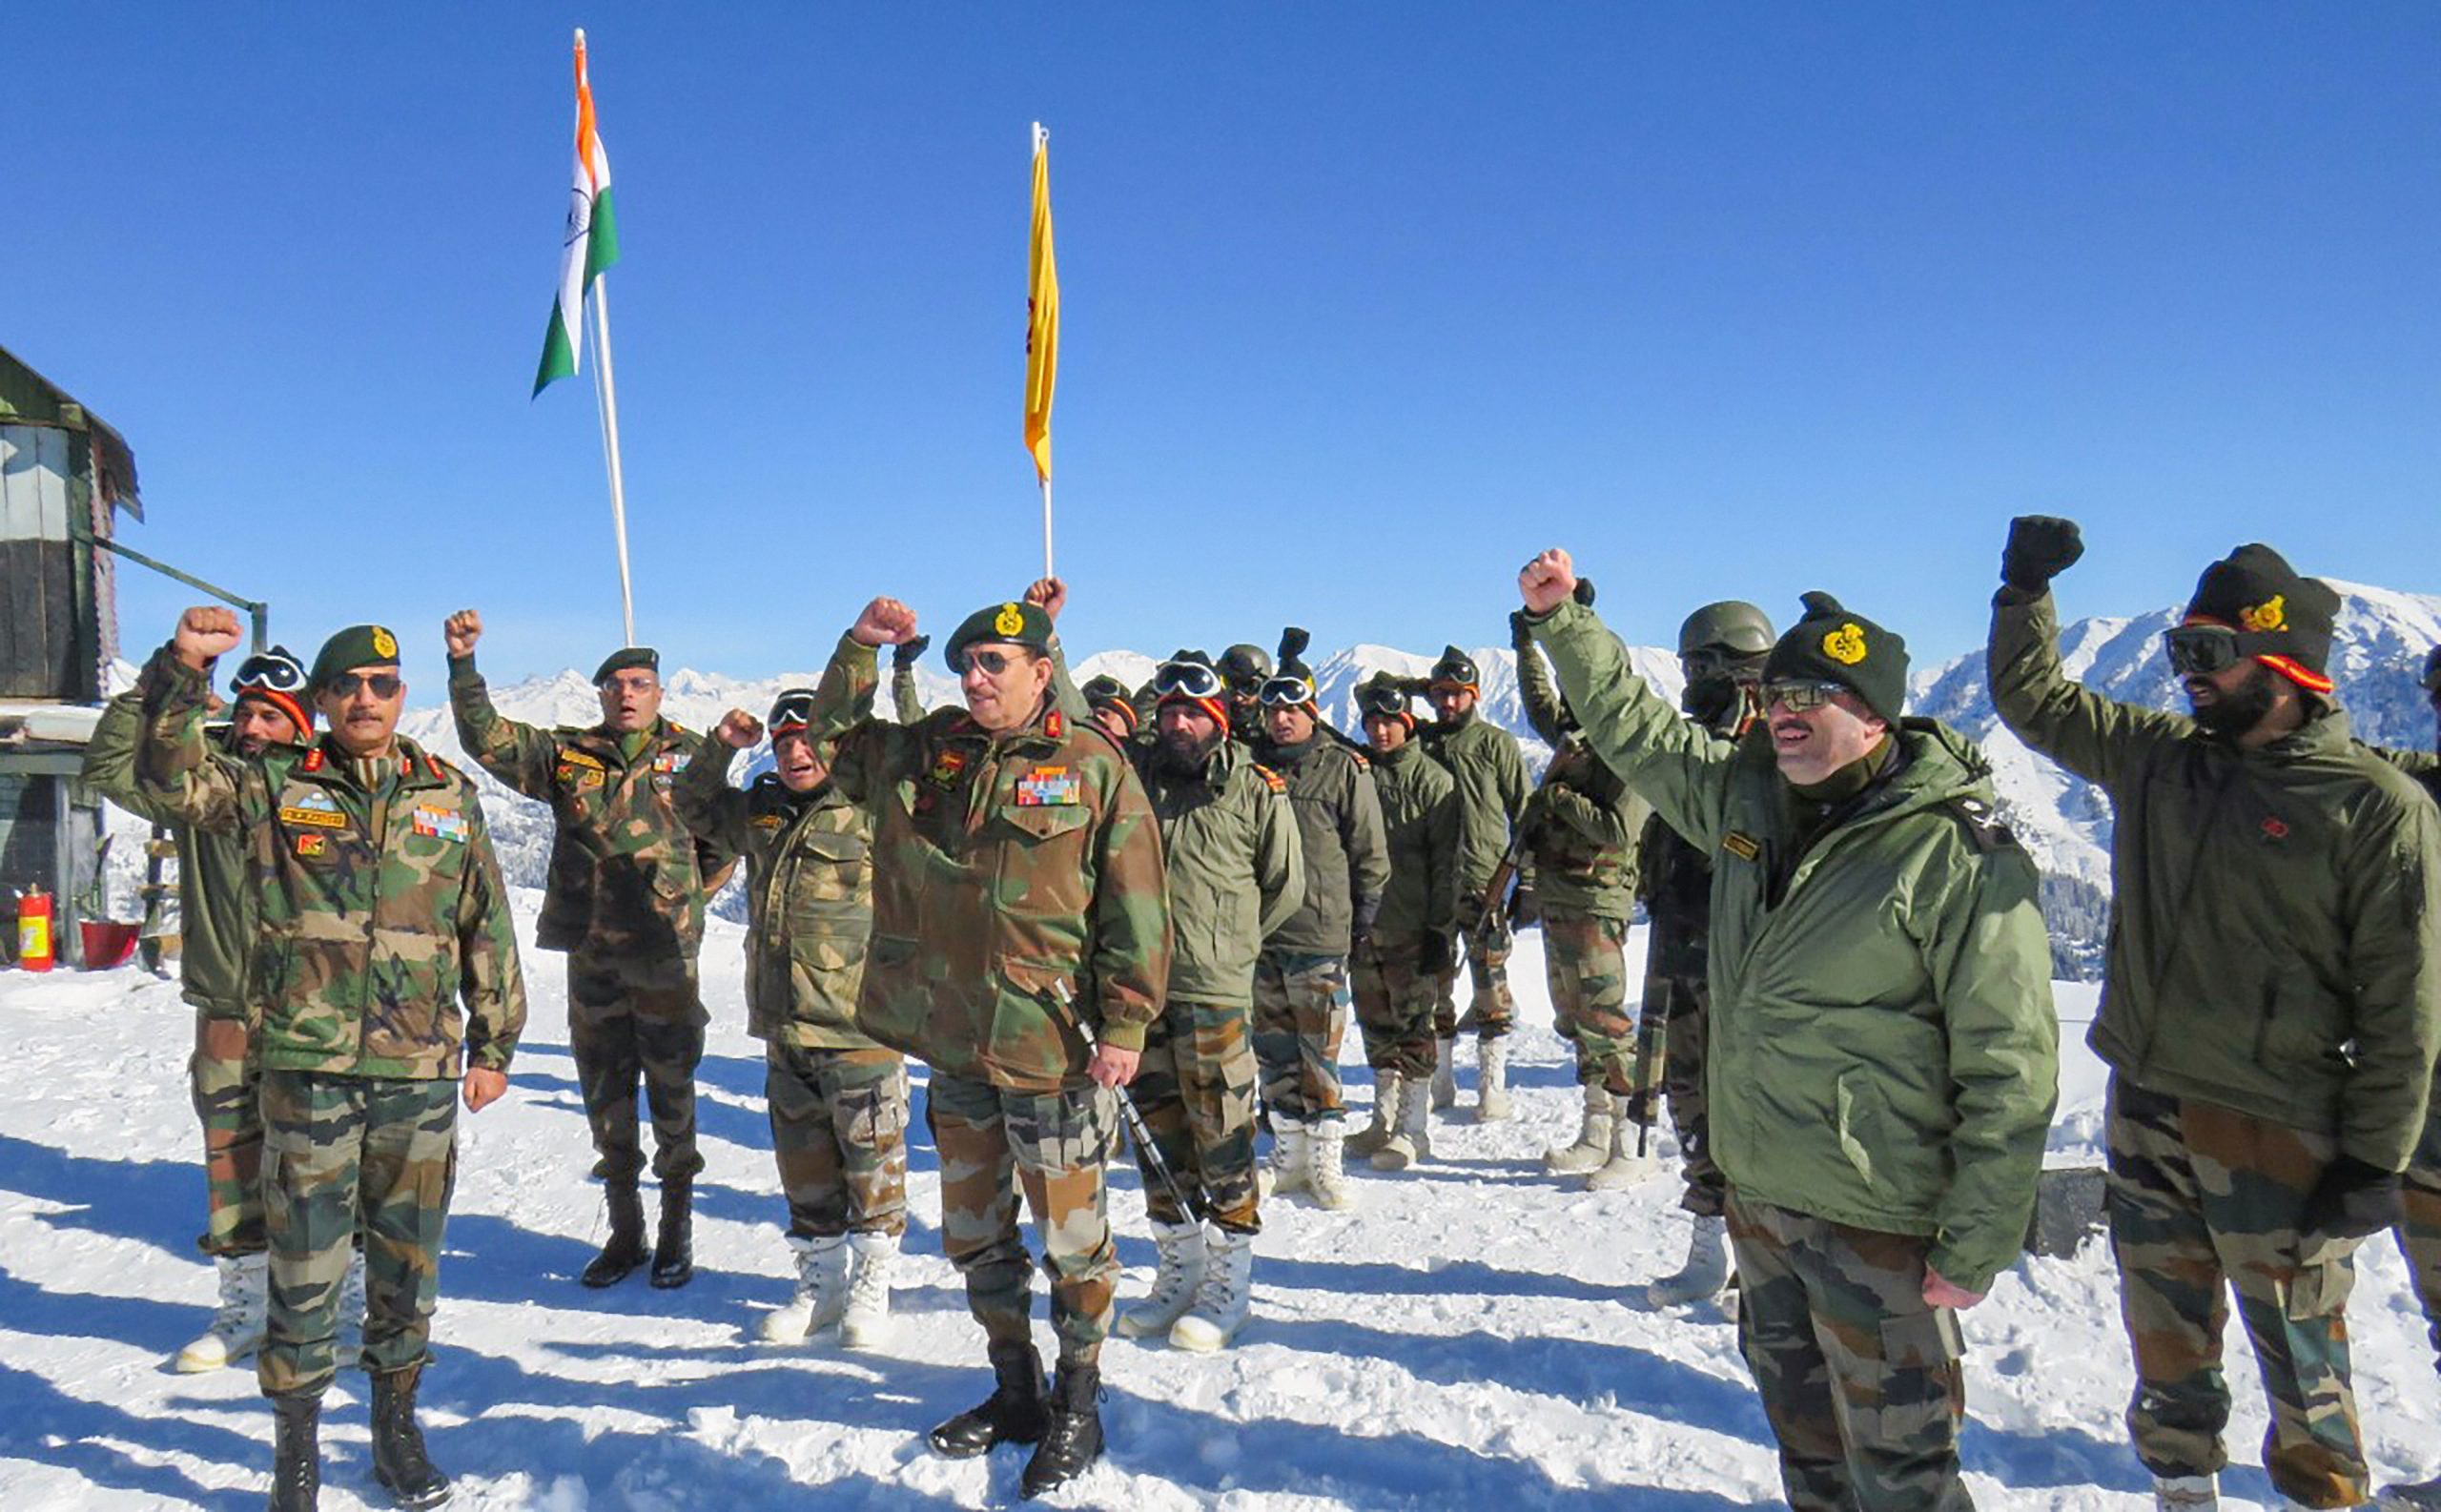 7 amazing facts about the Indian Army that will fill your heart with pride